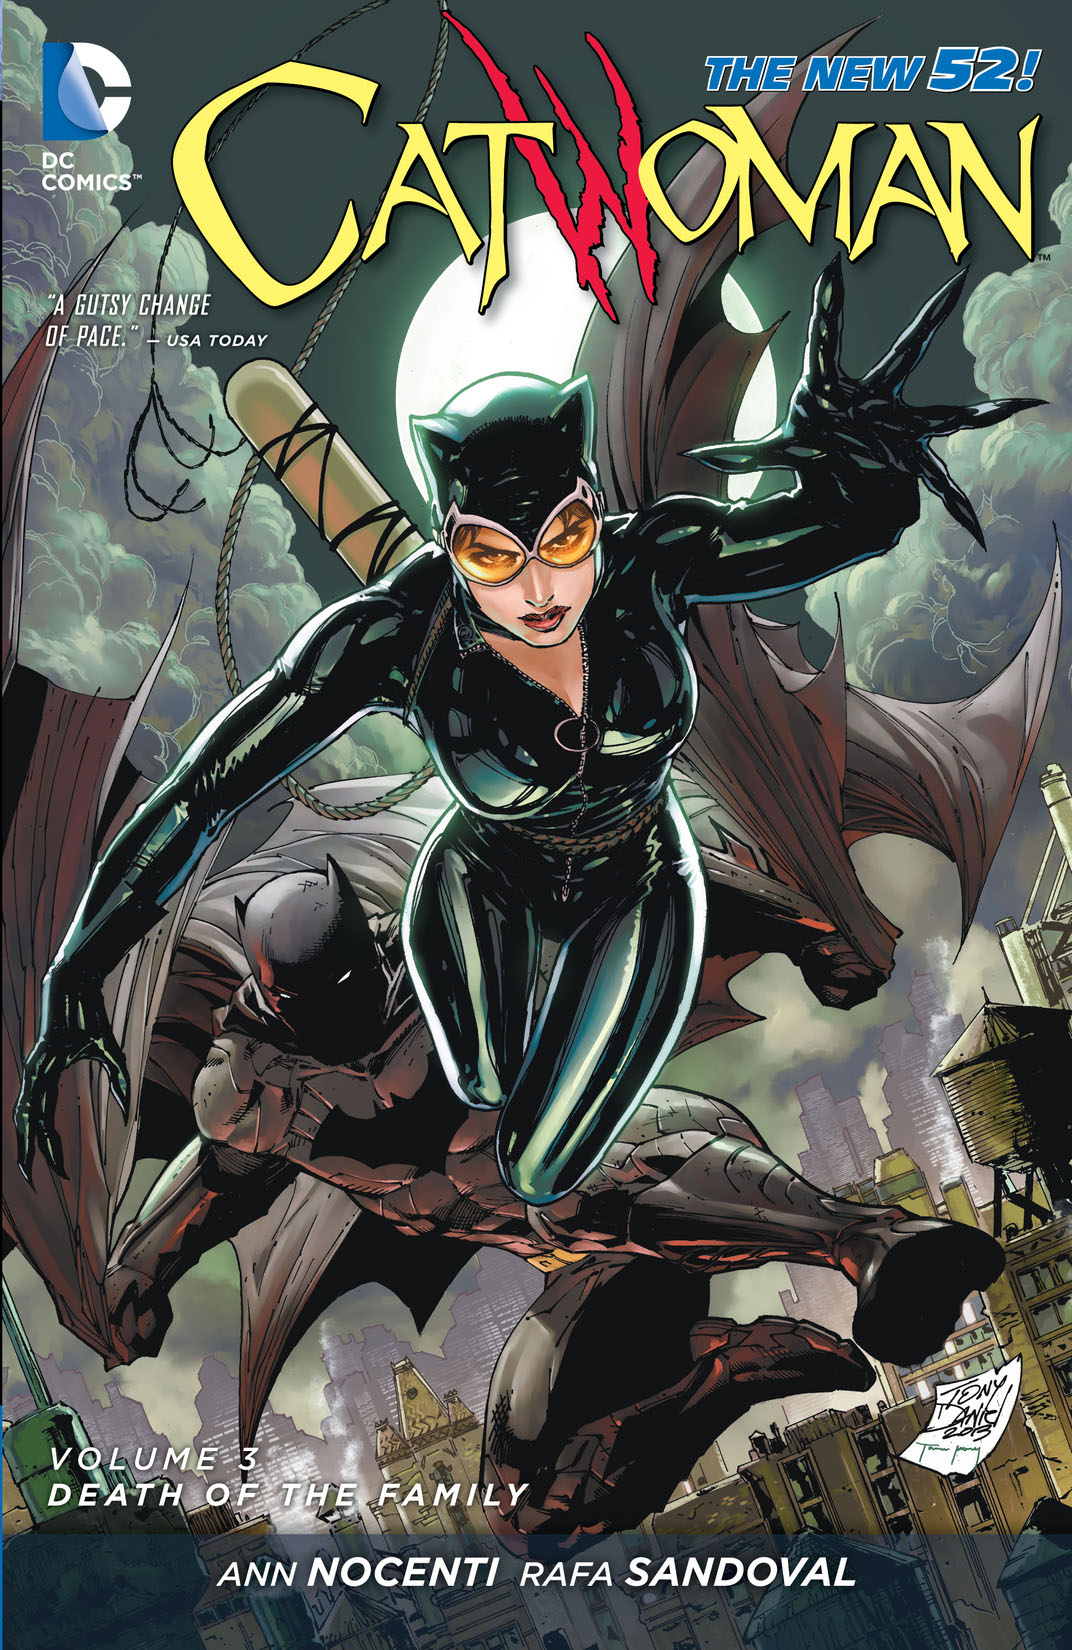 Catwoman Vol. 3: Death of the Family preview images